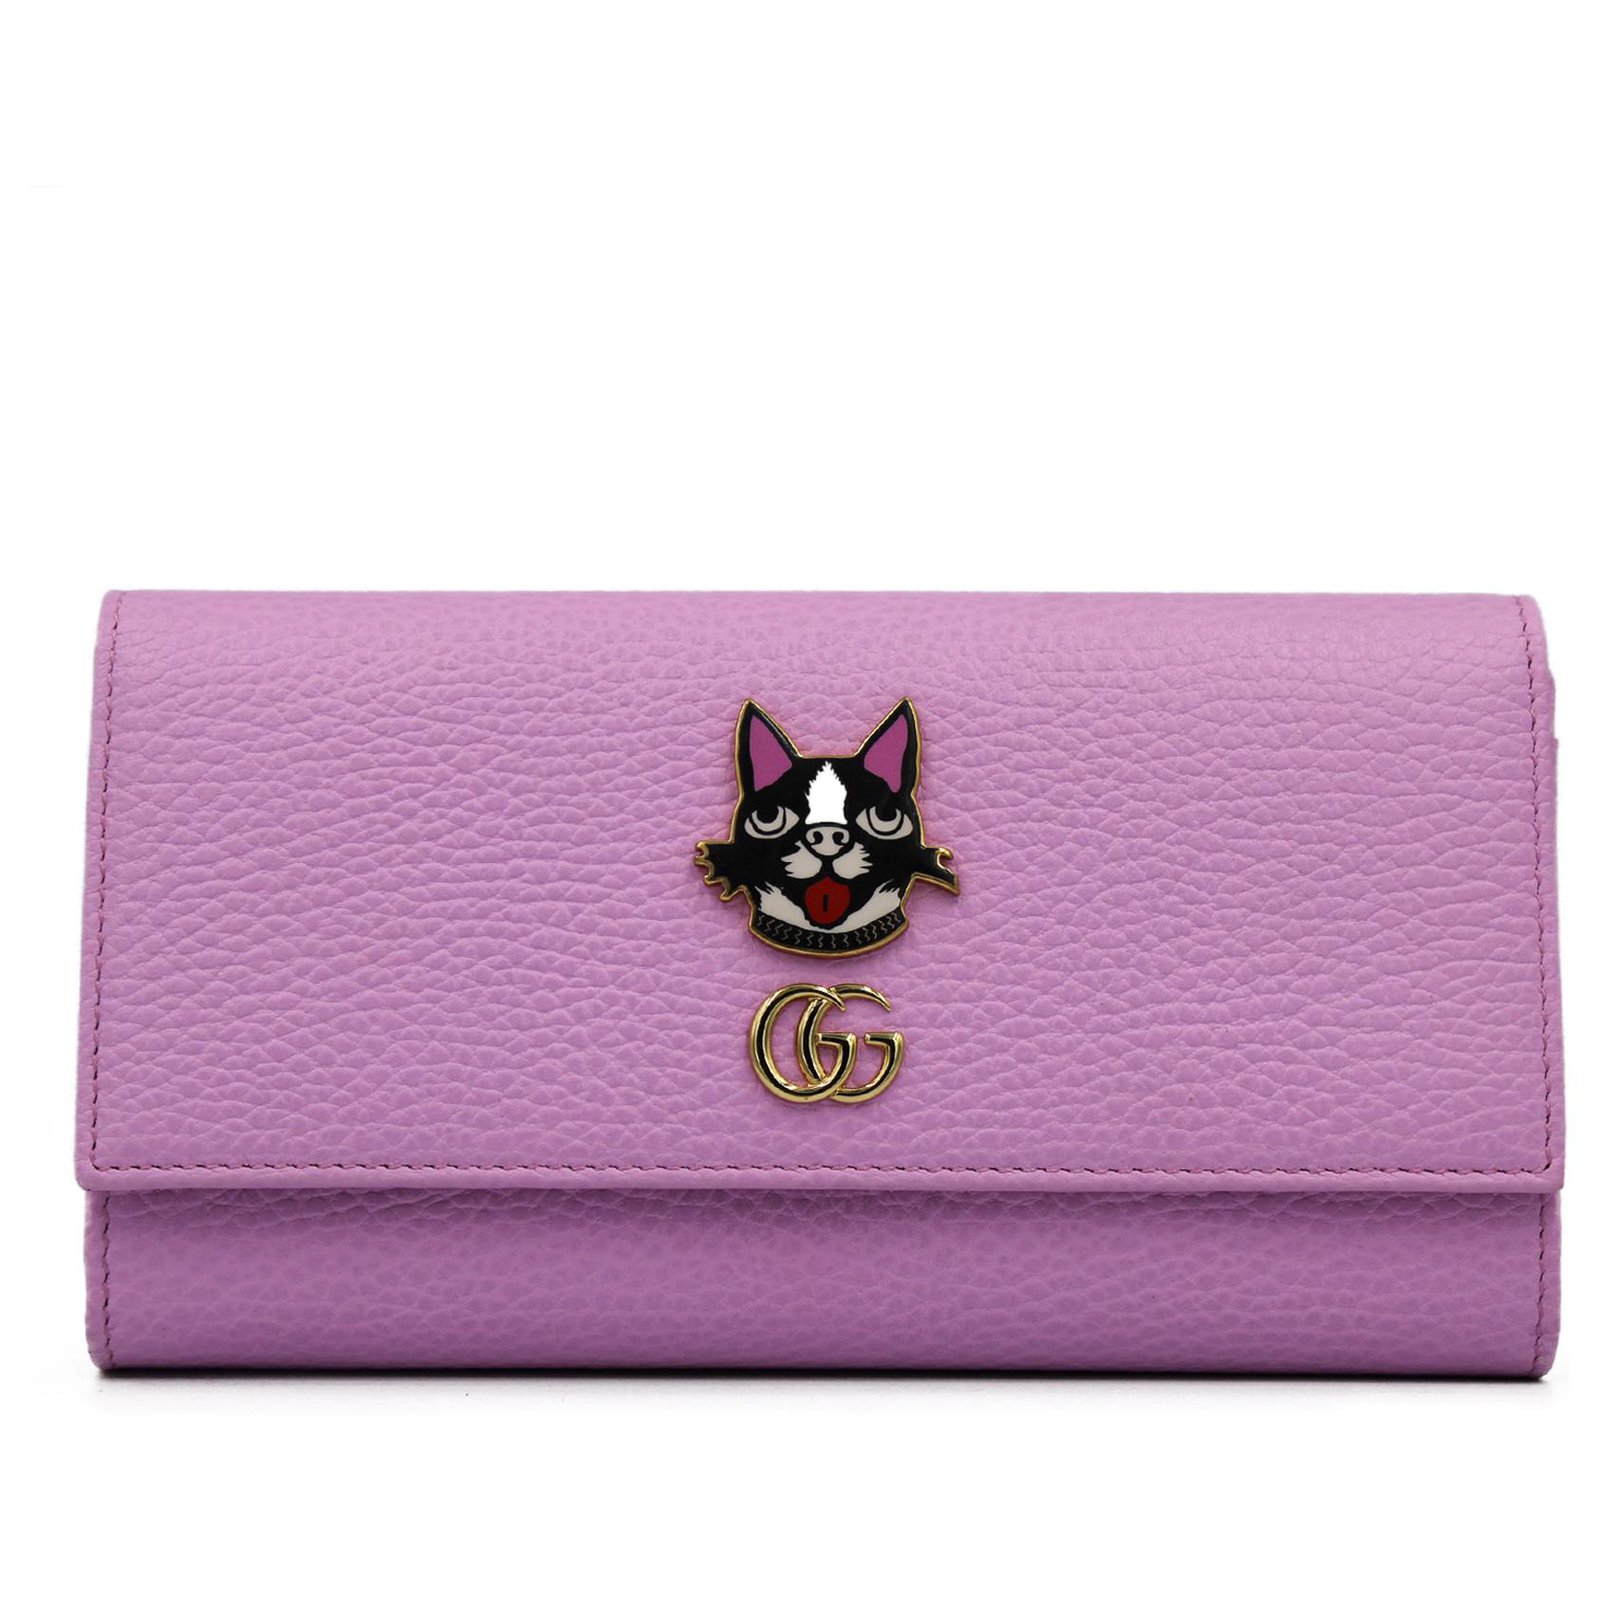 pink gucci dust bag